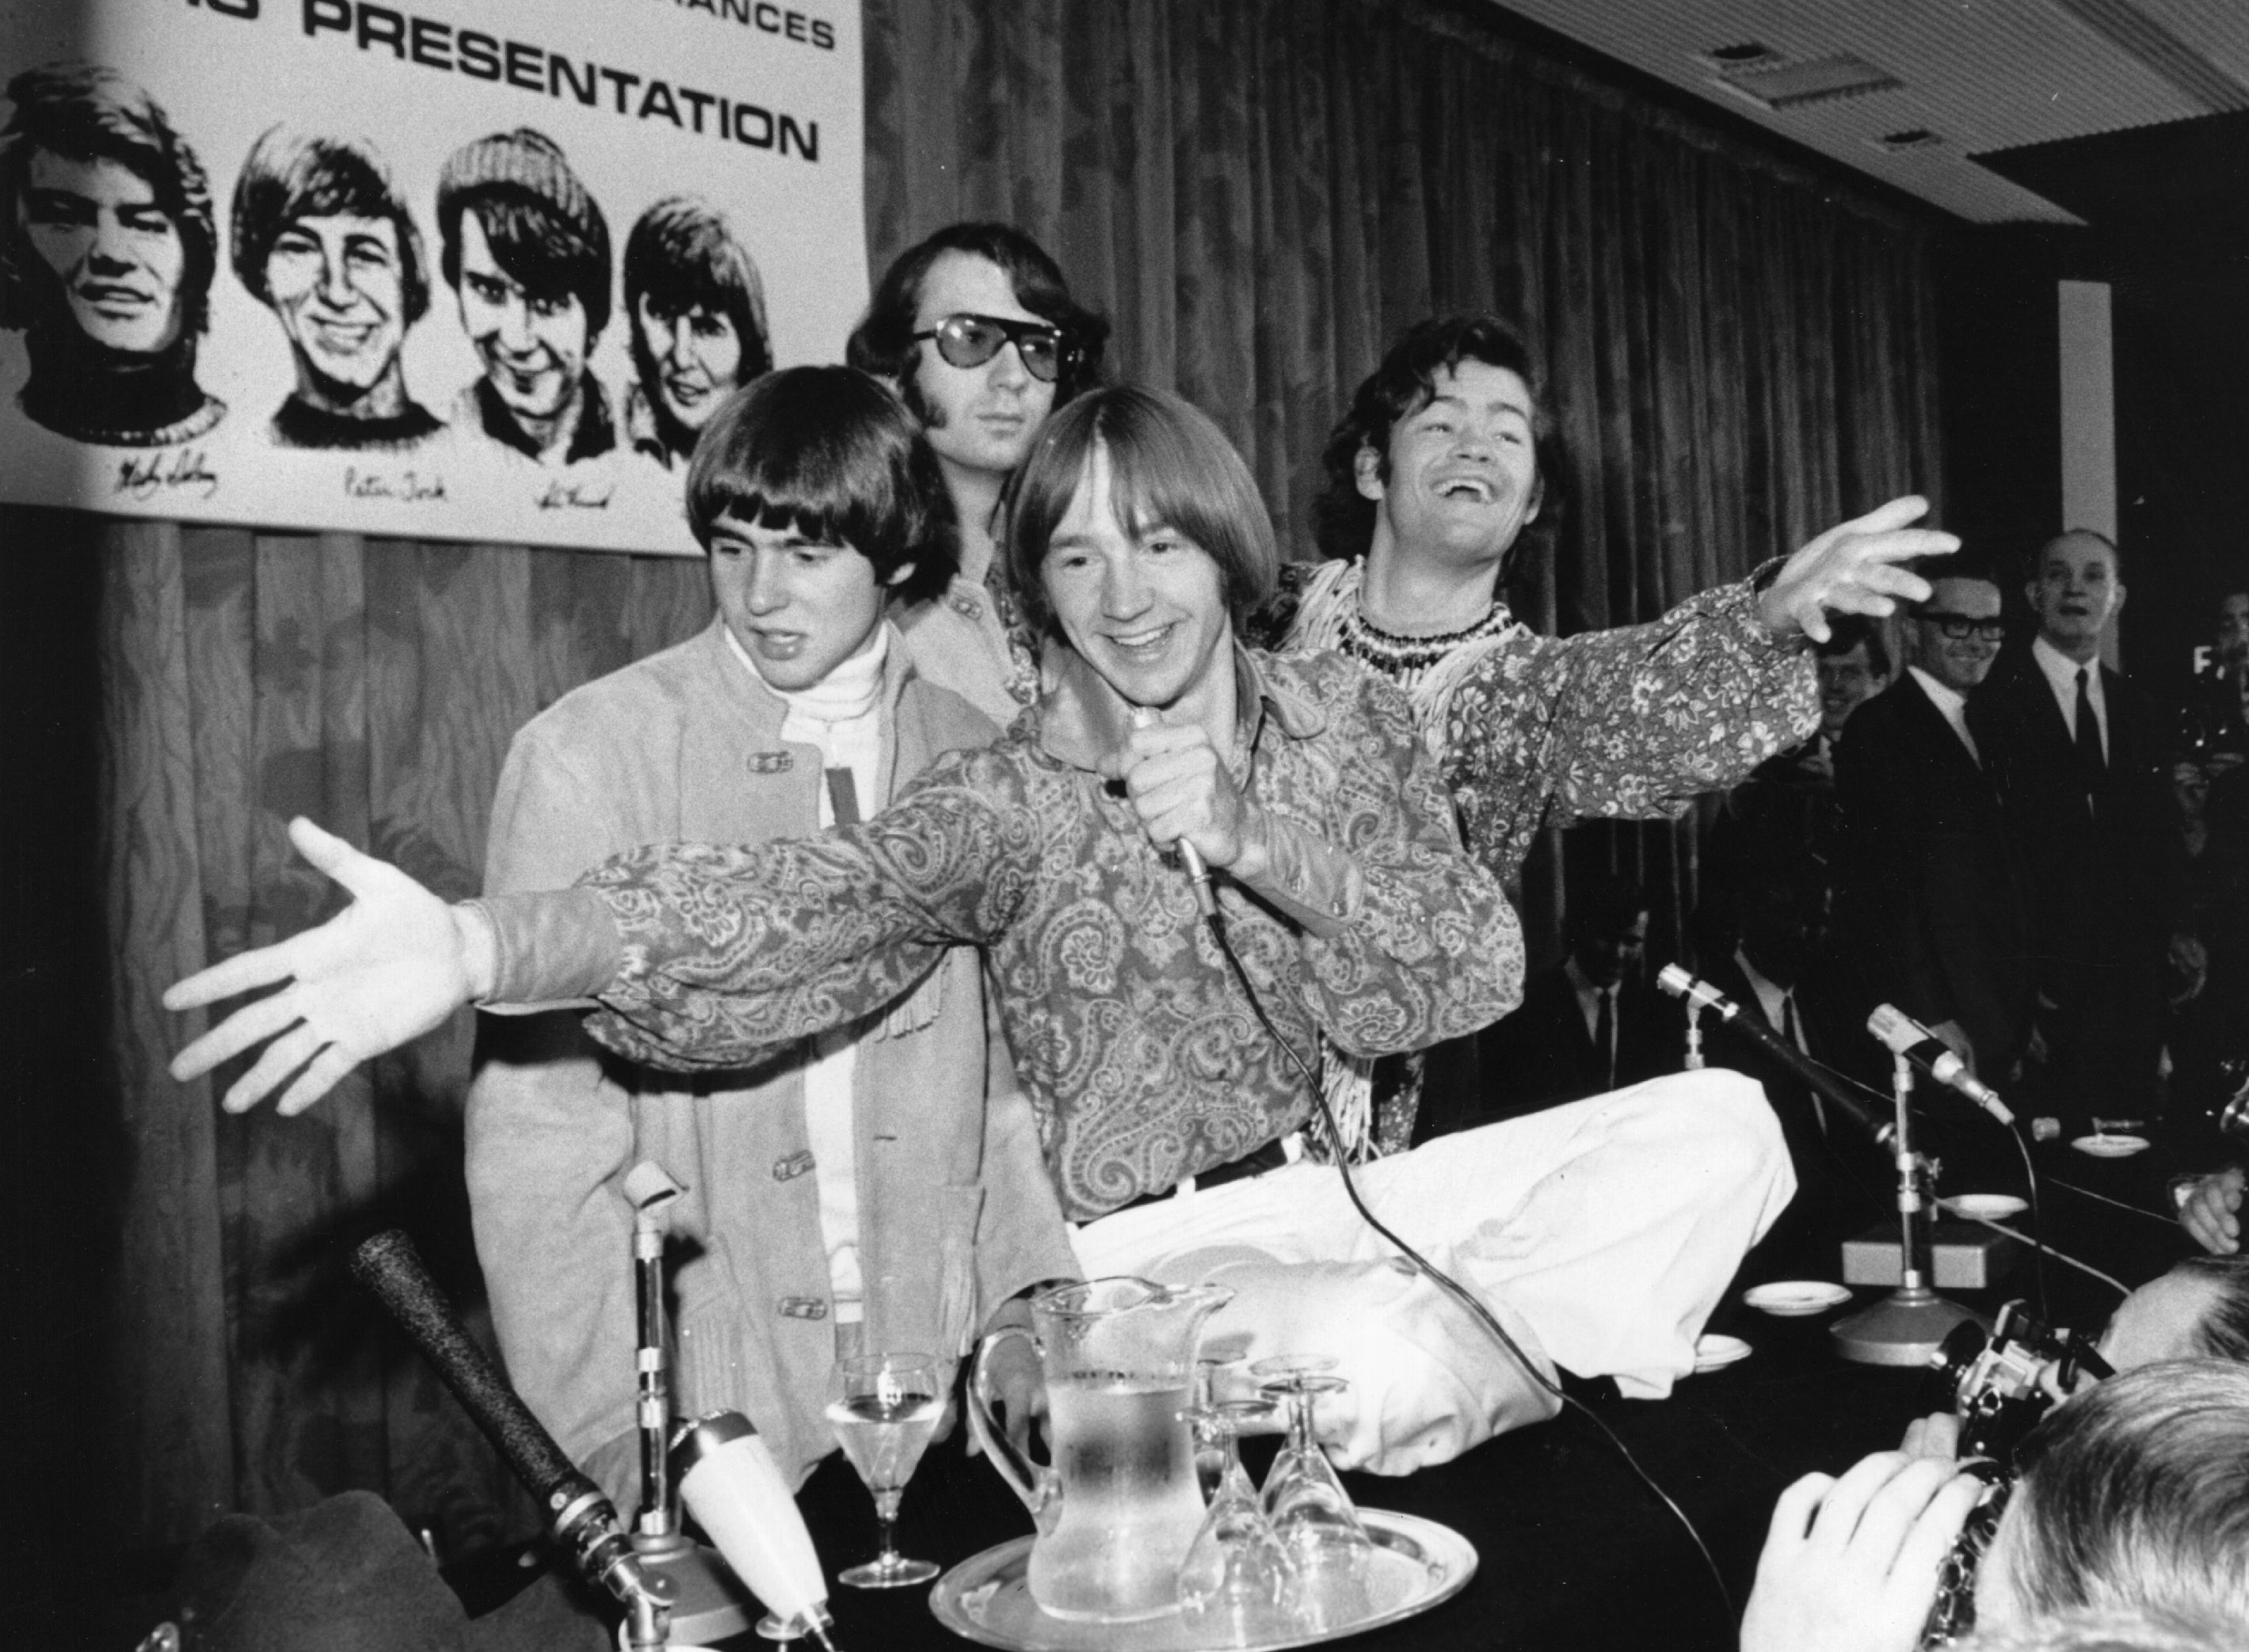 The Monkees’ Davy Jones, Mike Nesmith, Peter Tork, and Micky Dolenz at a table